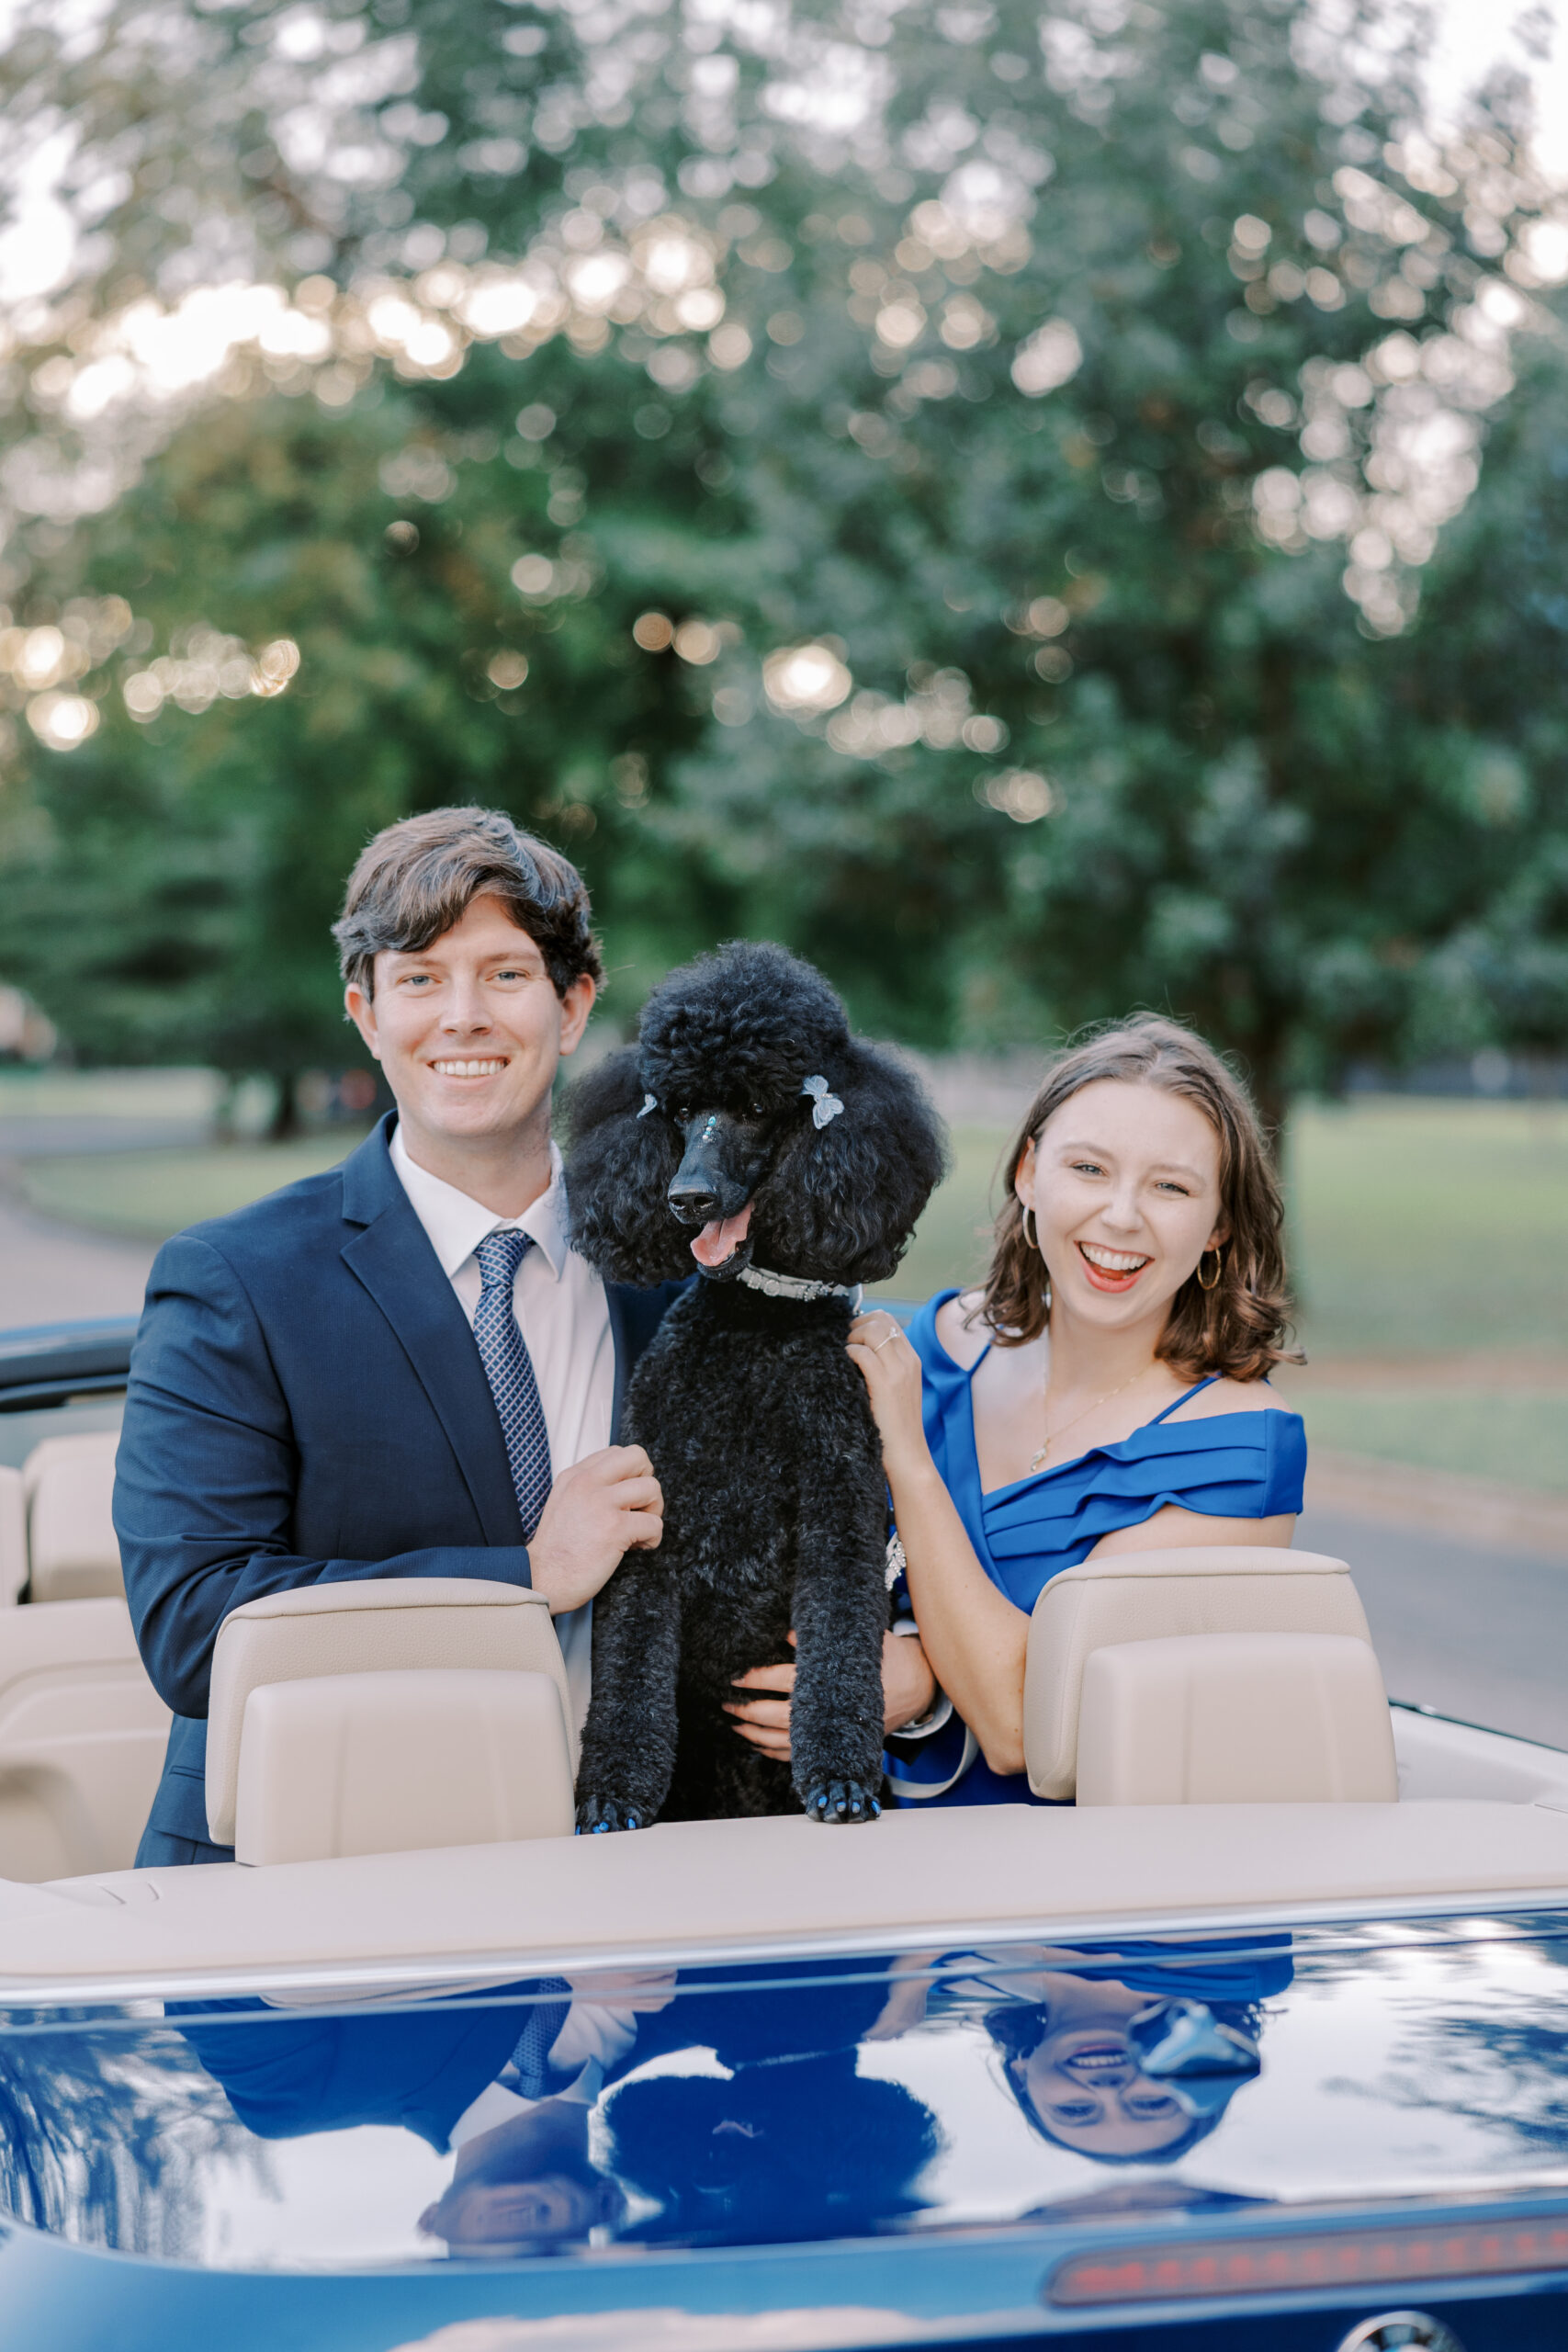 byrd park engagement session, the bride and groom pose with their dog and car